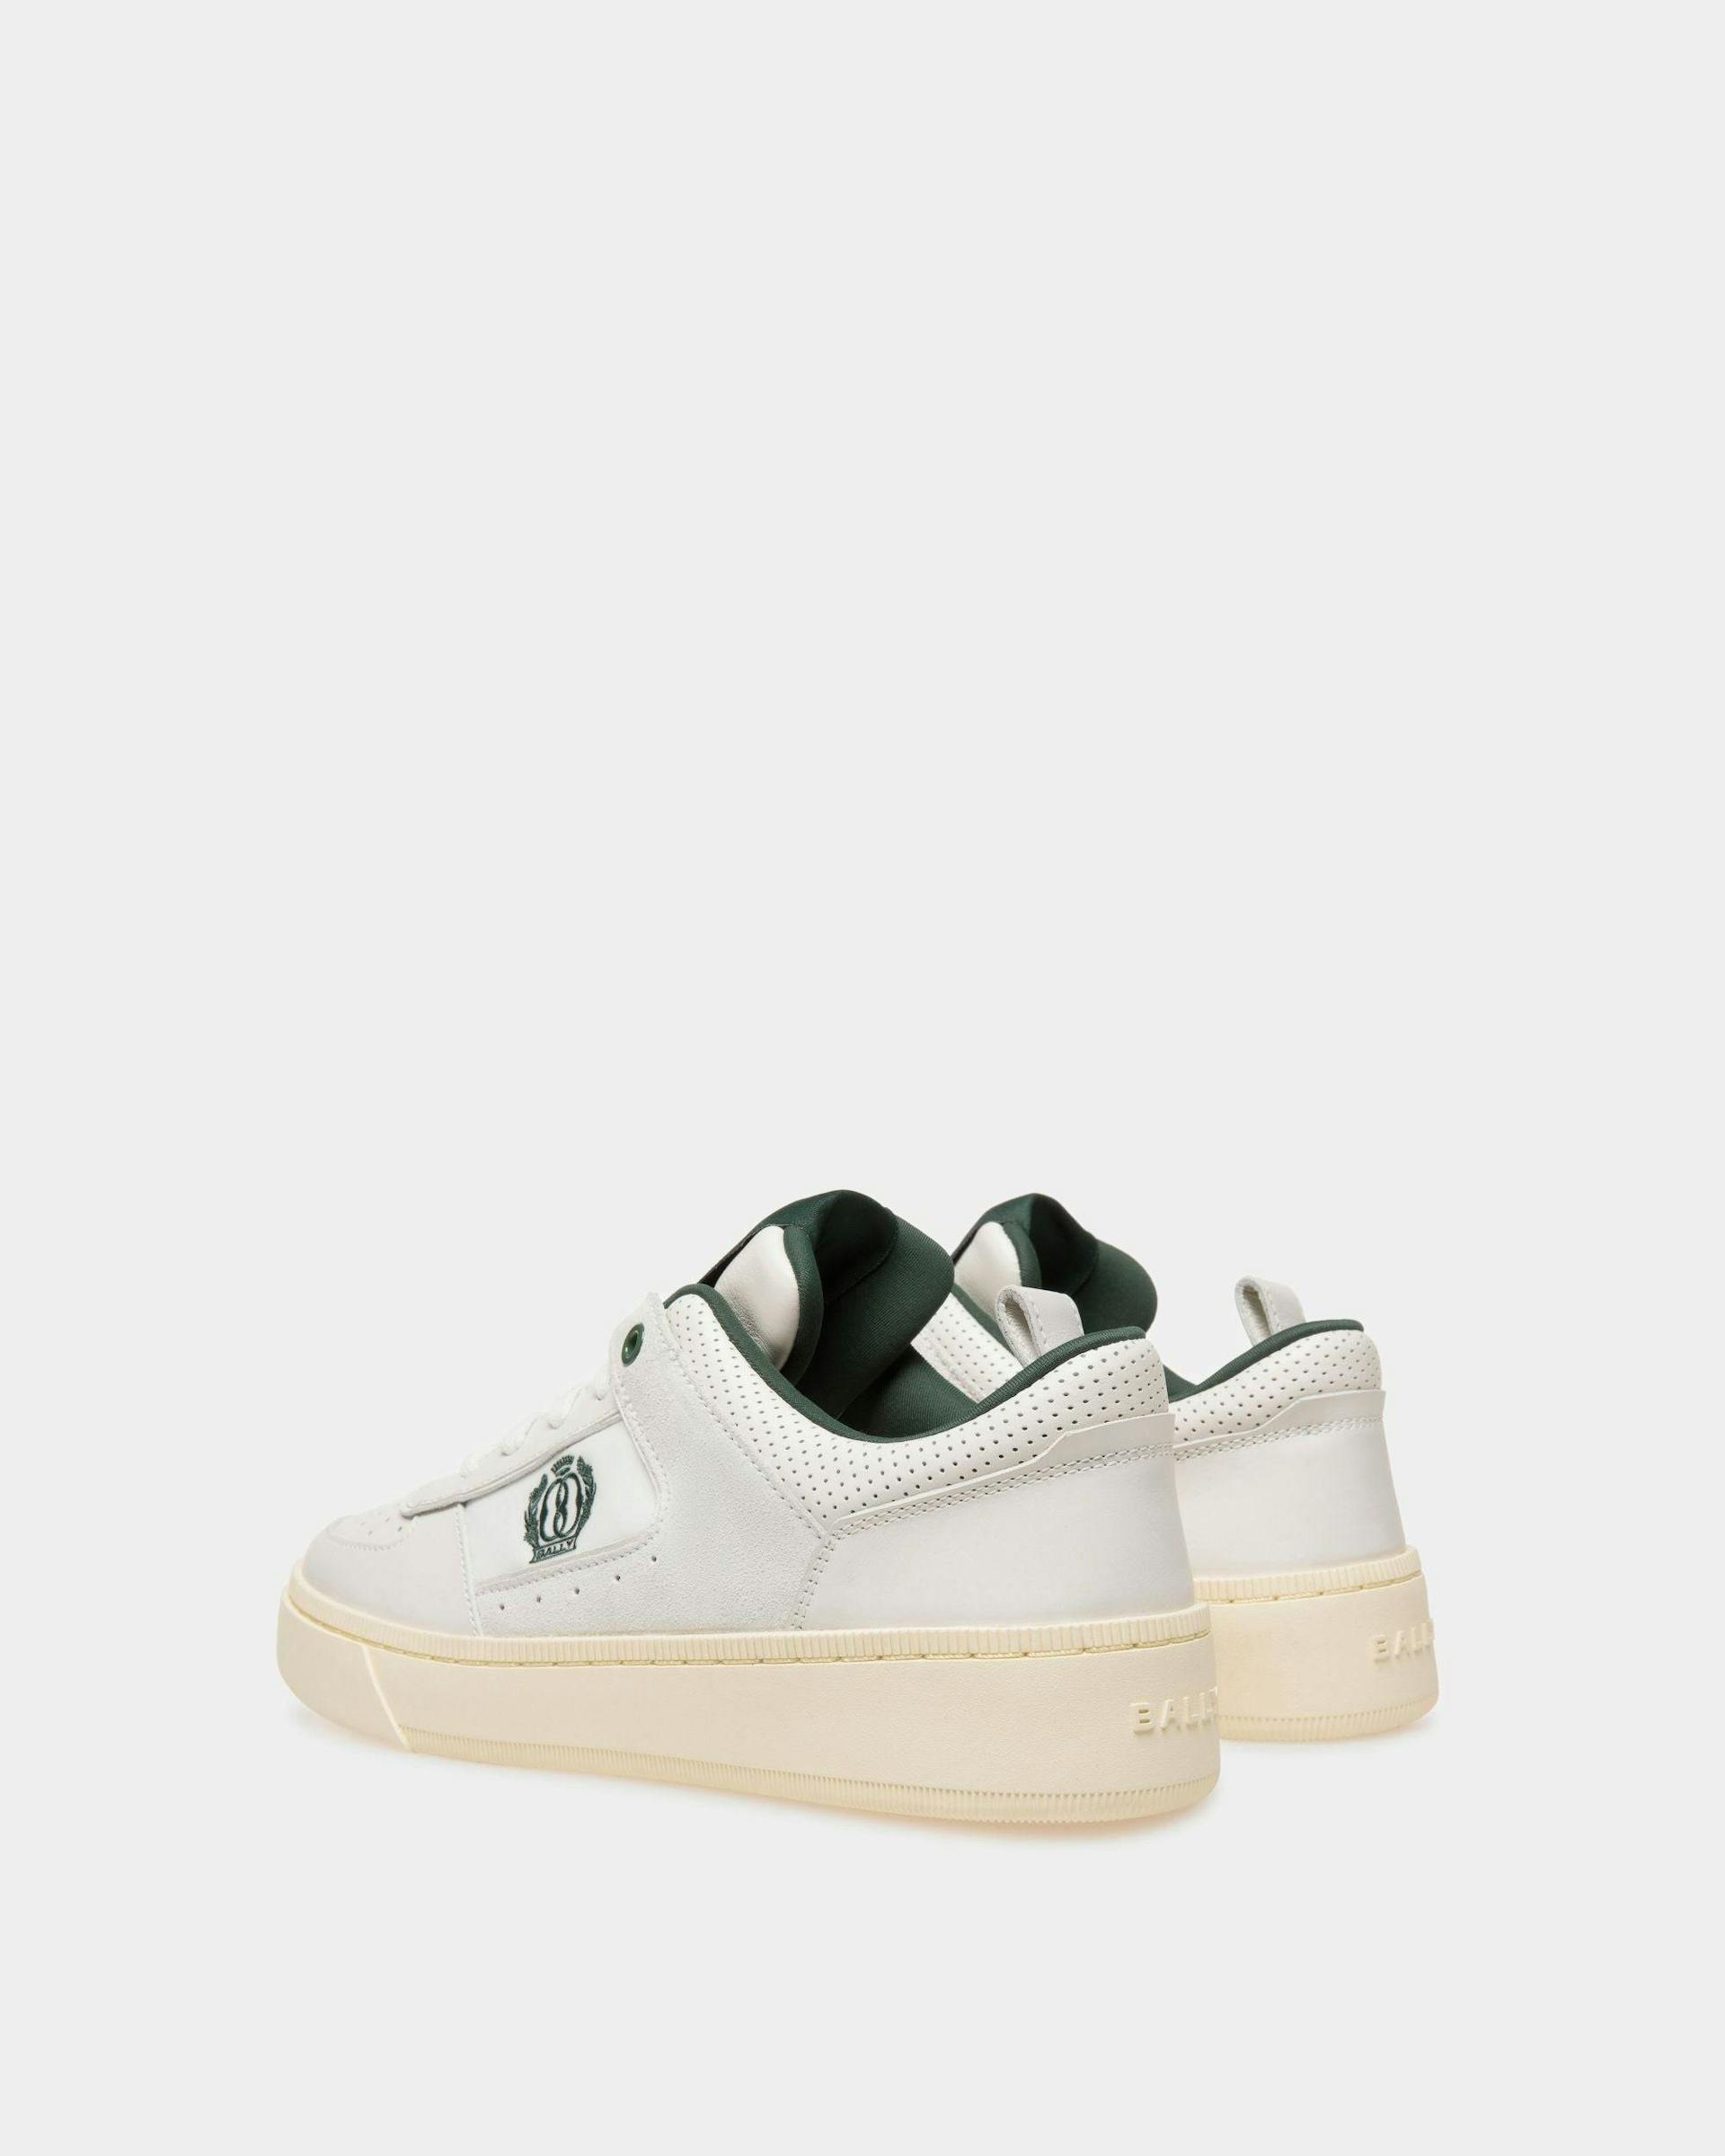 Women's Raise Sneakers In White And Green Leather | Bally | Still Life 3/4 Back